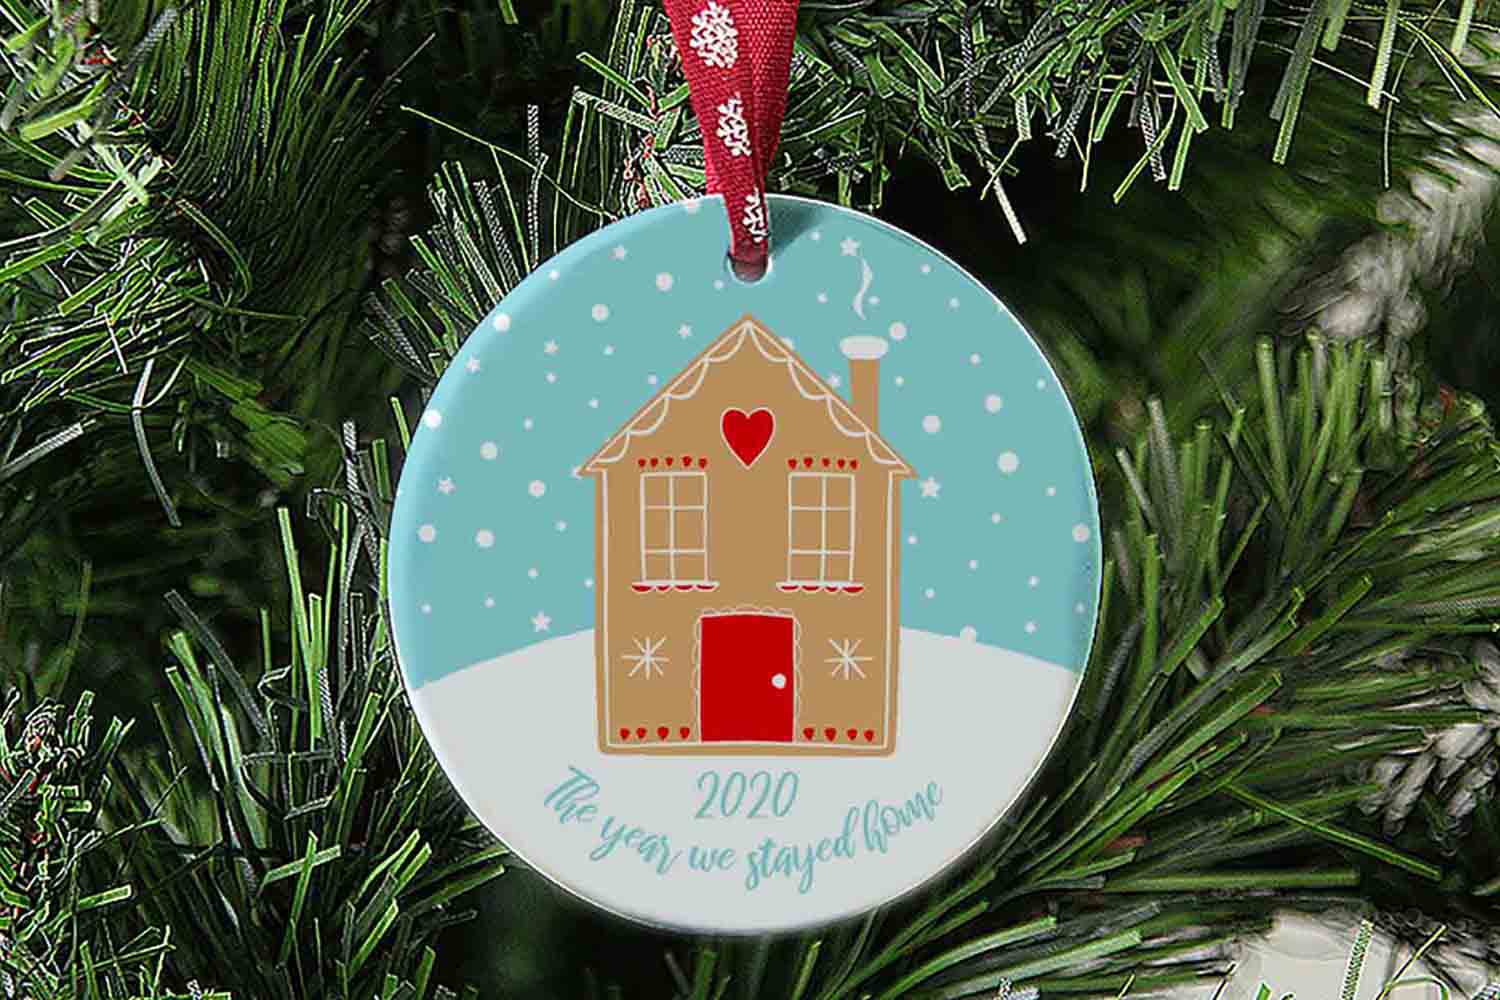 2020 The Year We Stayed Home Gingerbread House Ceramic Christmas Tree Decoration